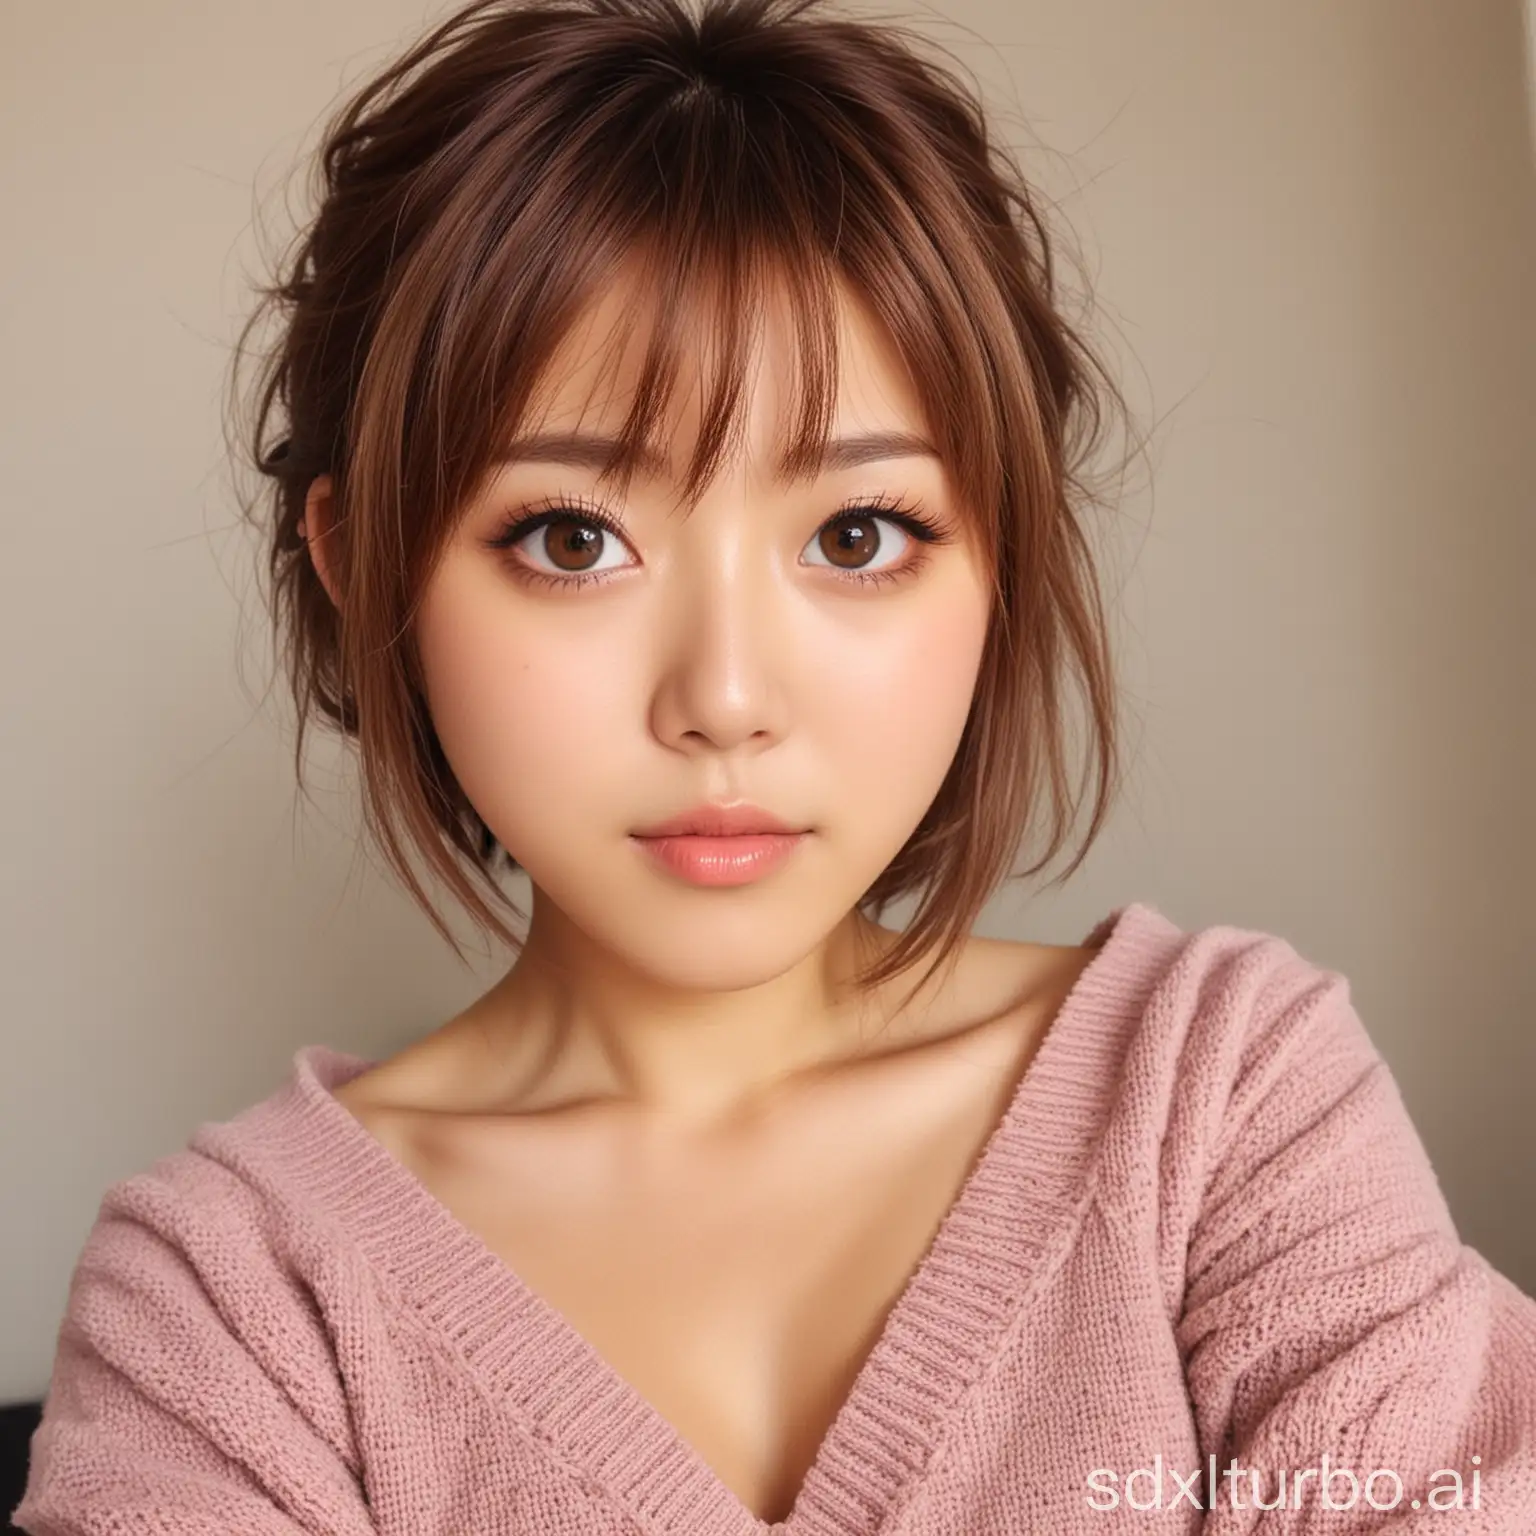 Japanese-Idol-with-Gorgeous-Face-and-Cute-Appearance